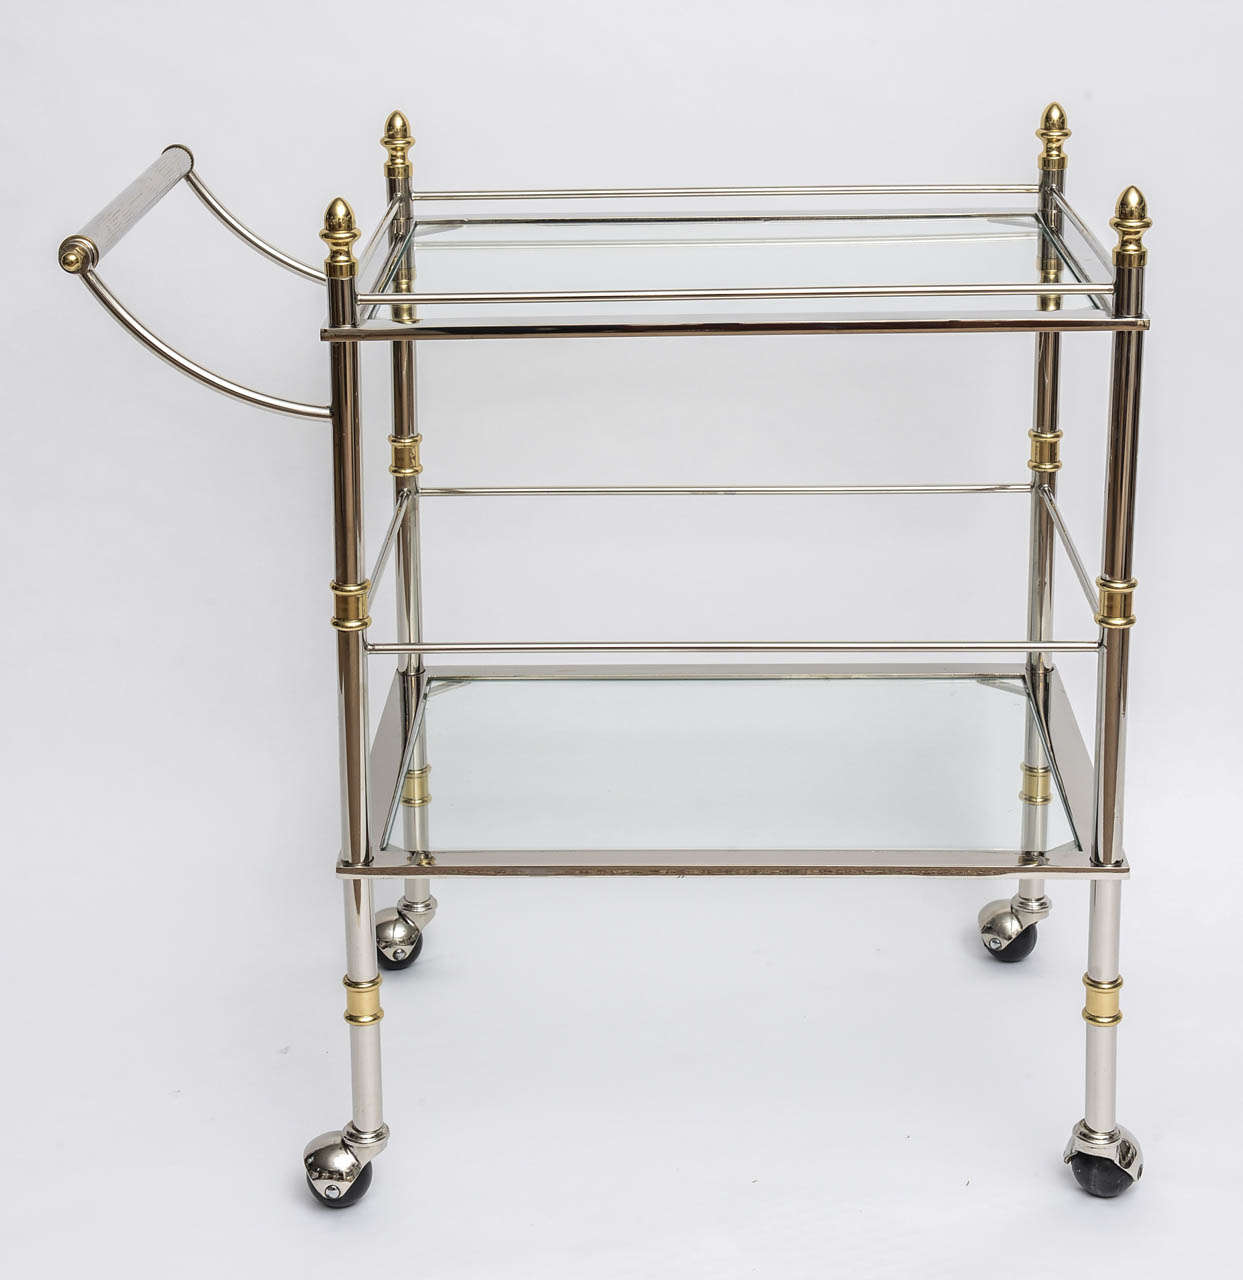 Gorgeous rolling bar or serving cart with two tiers of glass shelves. The top shelf has the fencing around it and the frame is in polished nickel adorned with brass accents including the acorn top finials. The wheels roll perfectly with ease and are